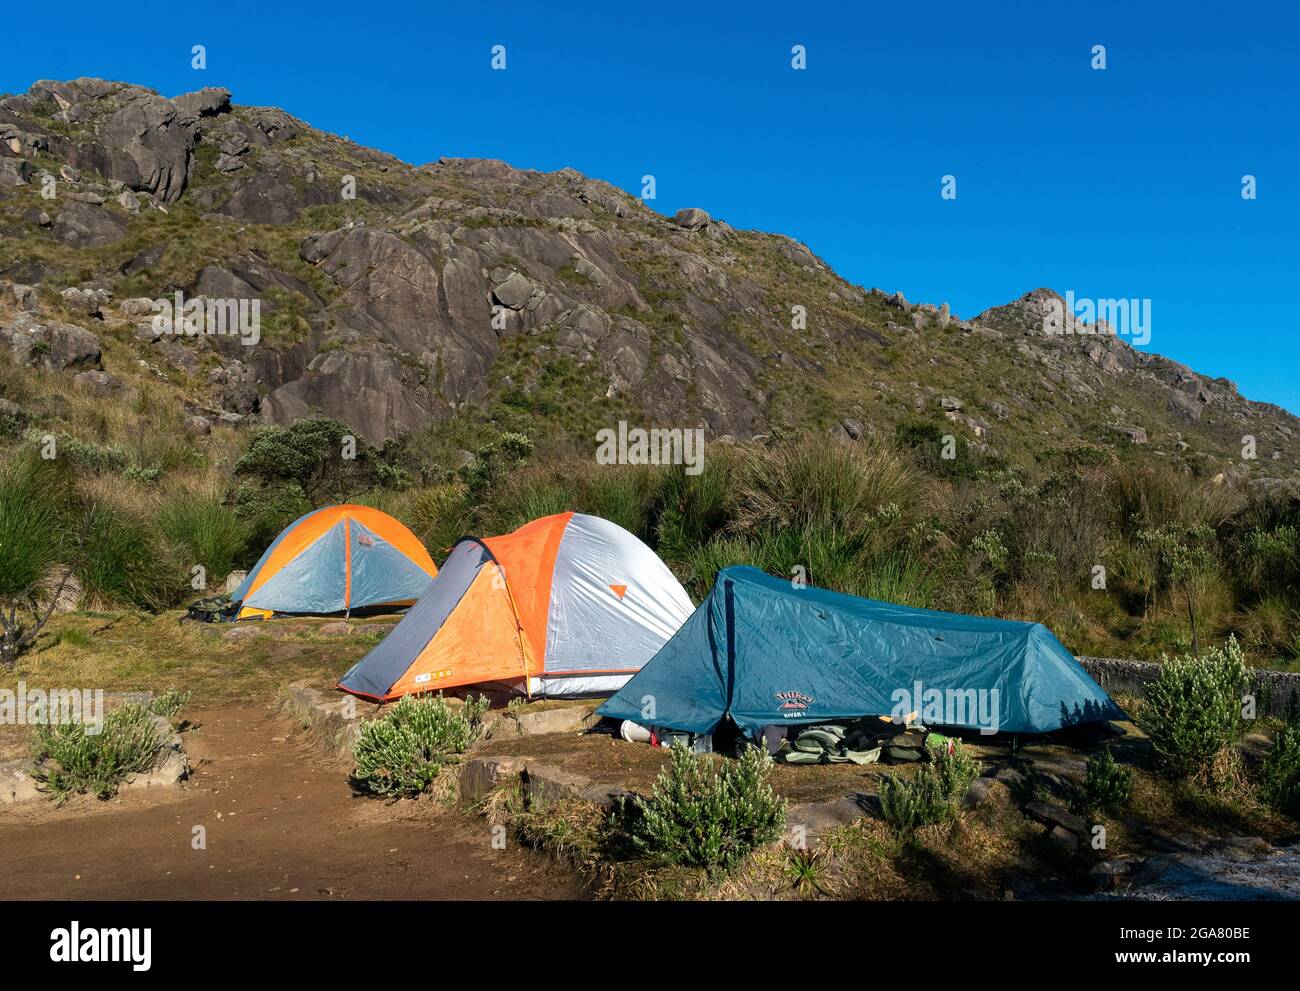 camping site with tents in altitude scenery background Stock Photo